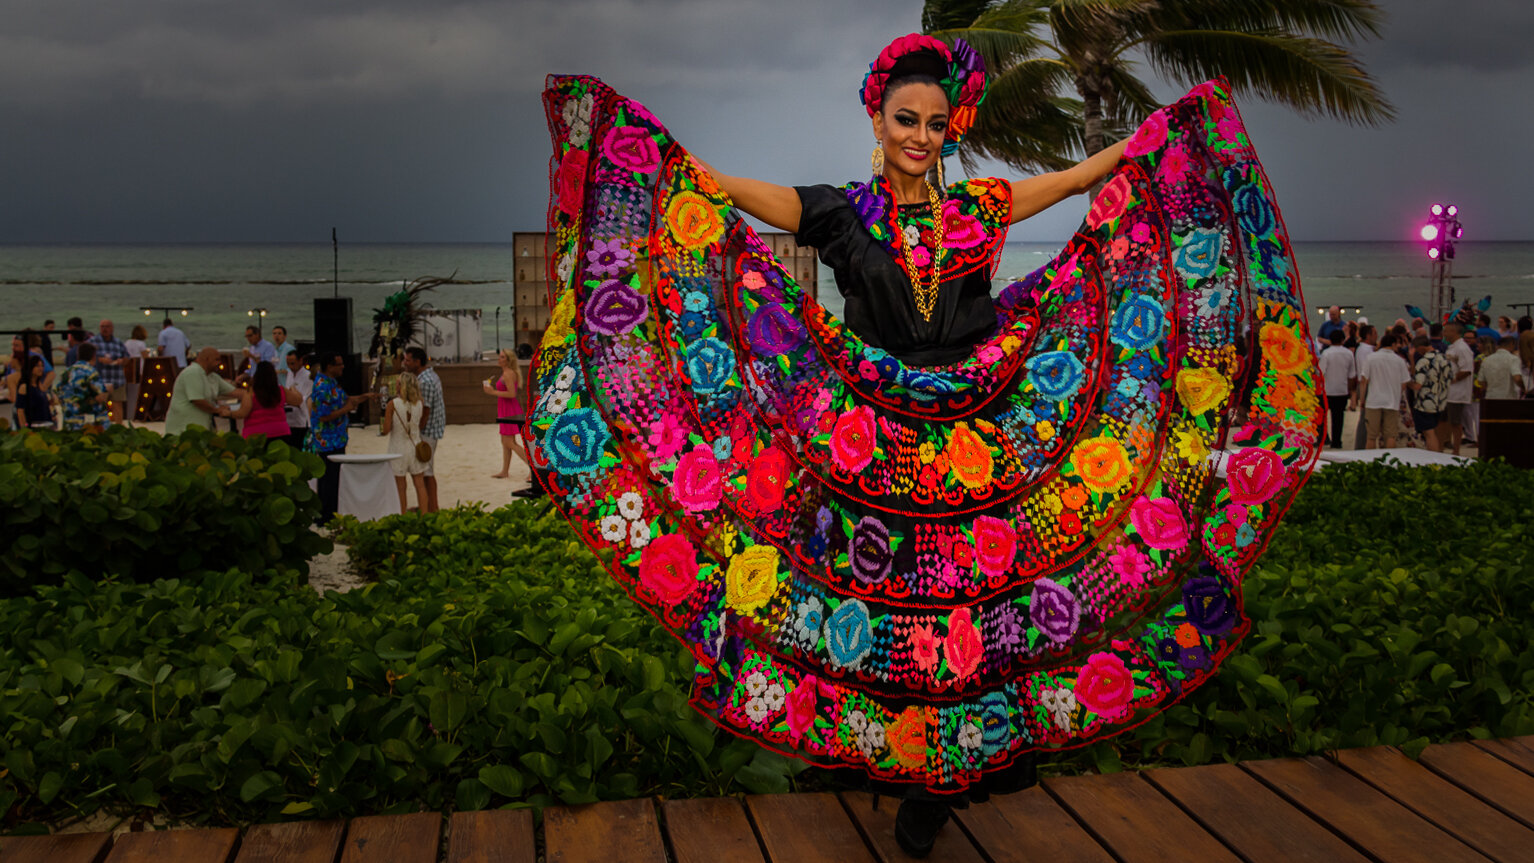 Photo Opportunity with Traditional Mexican Lady, Playa del Carmen, Mexico